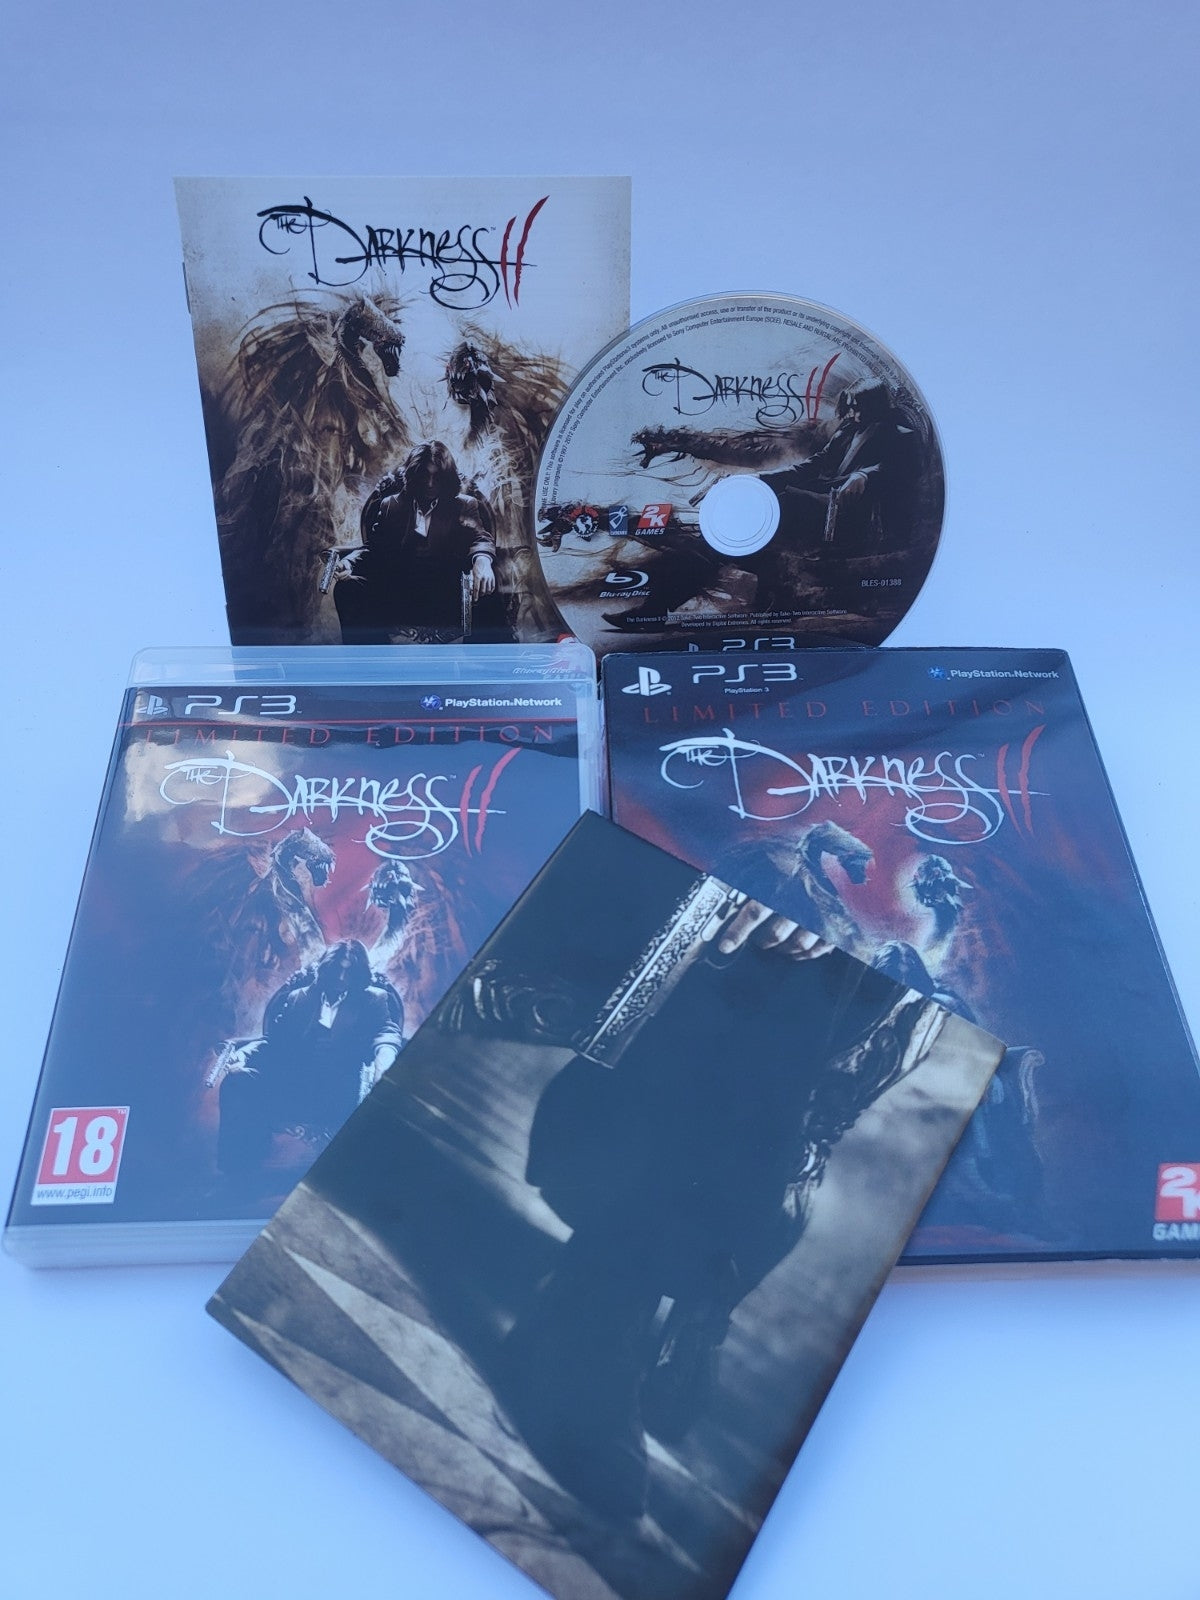 the Darkness II Limited Edition Playstation 3